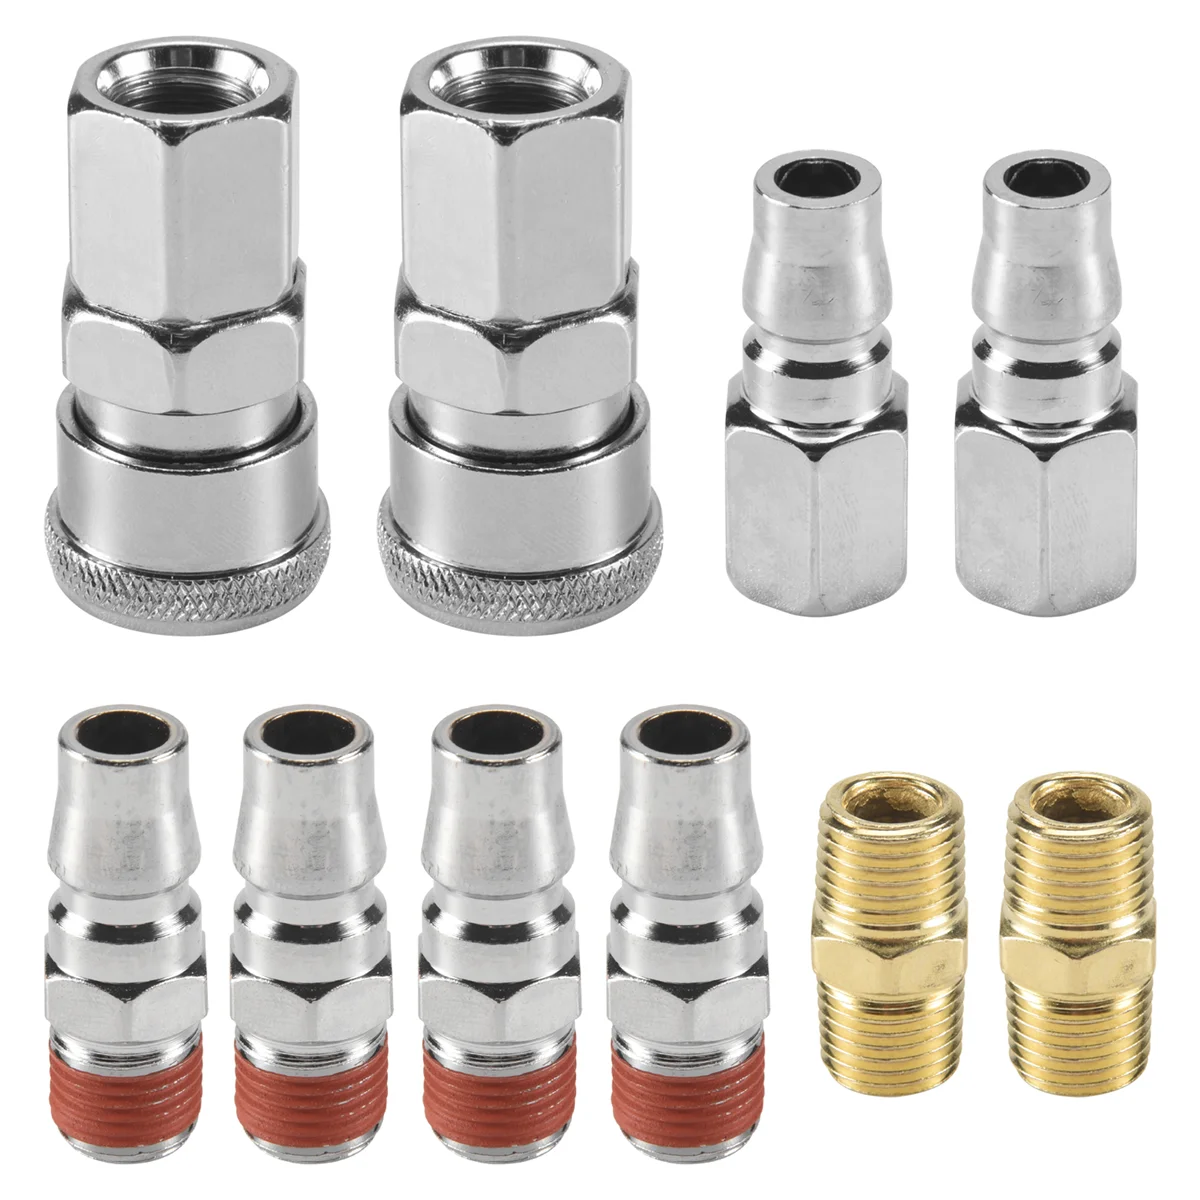 

10Pcs 1/4 inch BSP Air Line Hose Compressor Fitting Connector Coupler Quick Release Pneumatic Parts for Air Tools Hardware